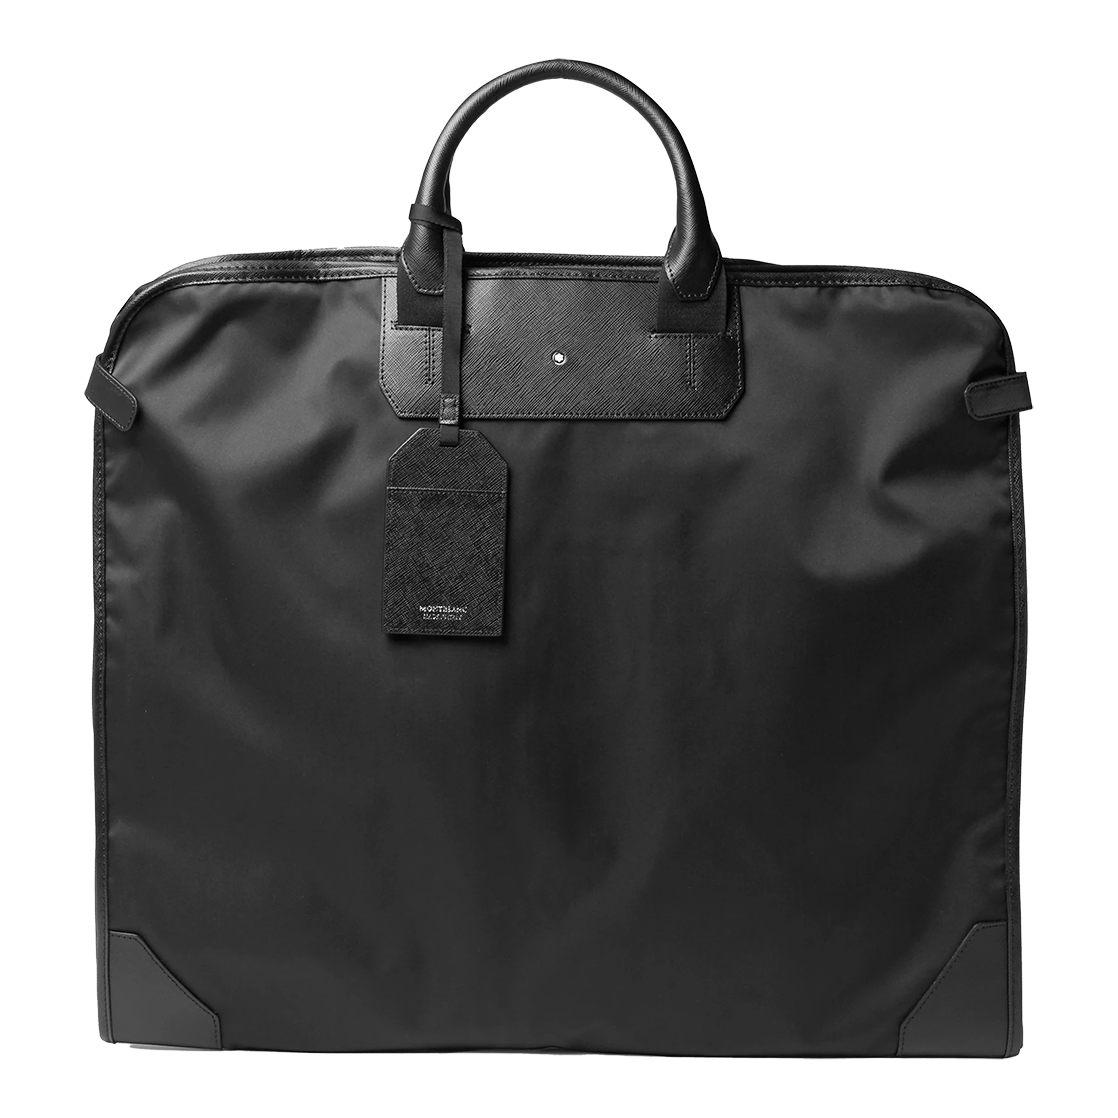 11 Best Garment Bags: Stay Stylish While Travelling